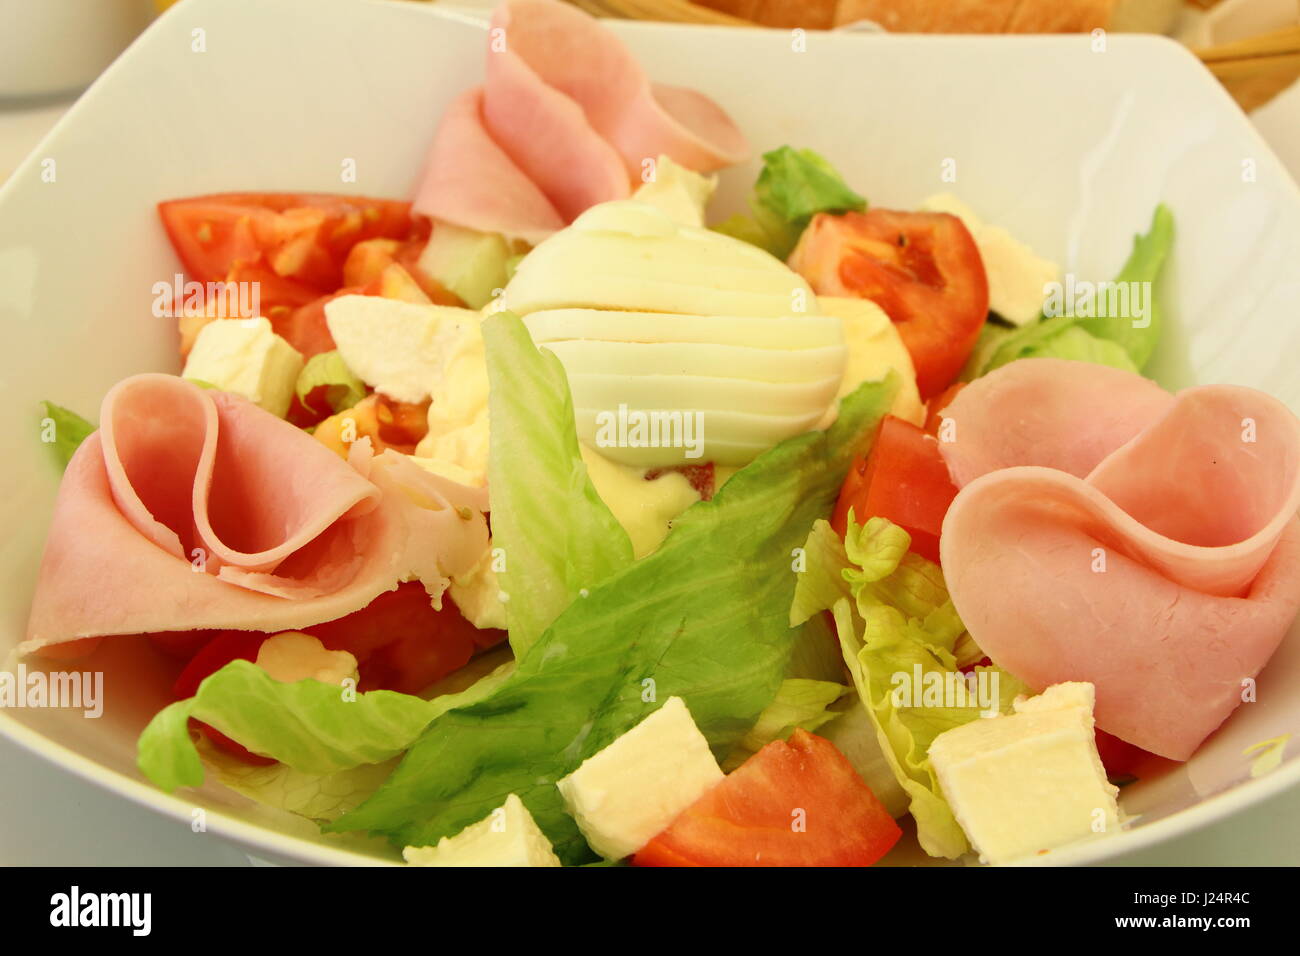 Plate of mixed salad Stock Photo